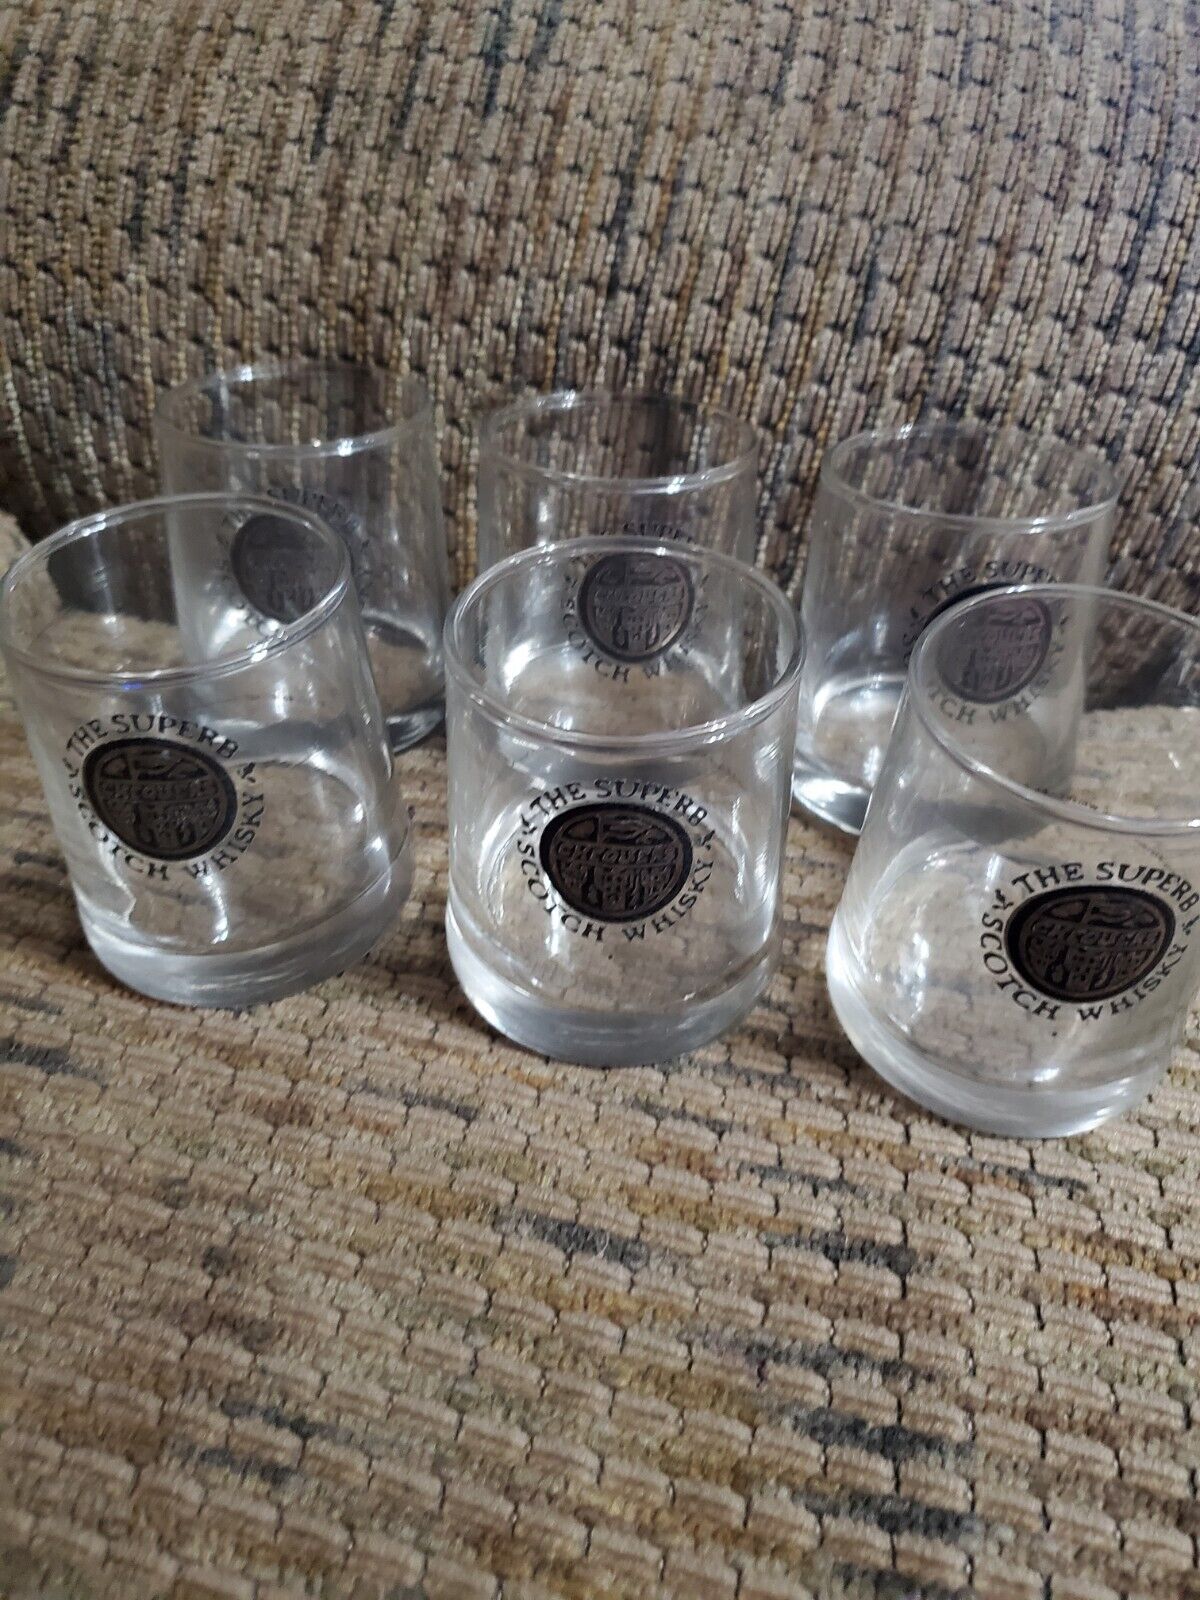 Chequers The Superb Scotch Whisky Lot of 6 Tumbler Whisky Glasses 